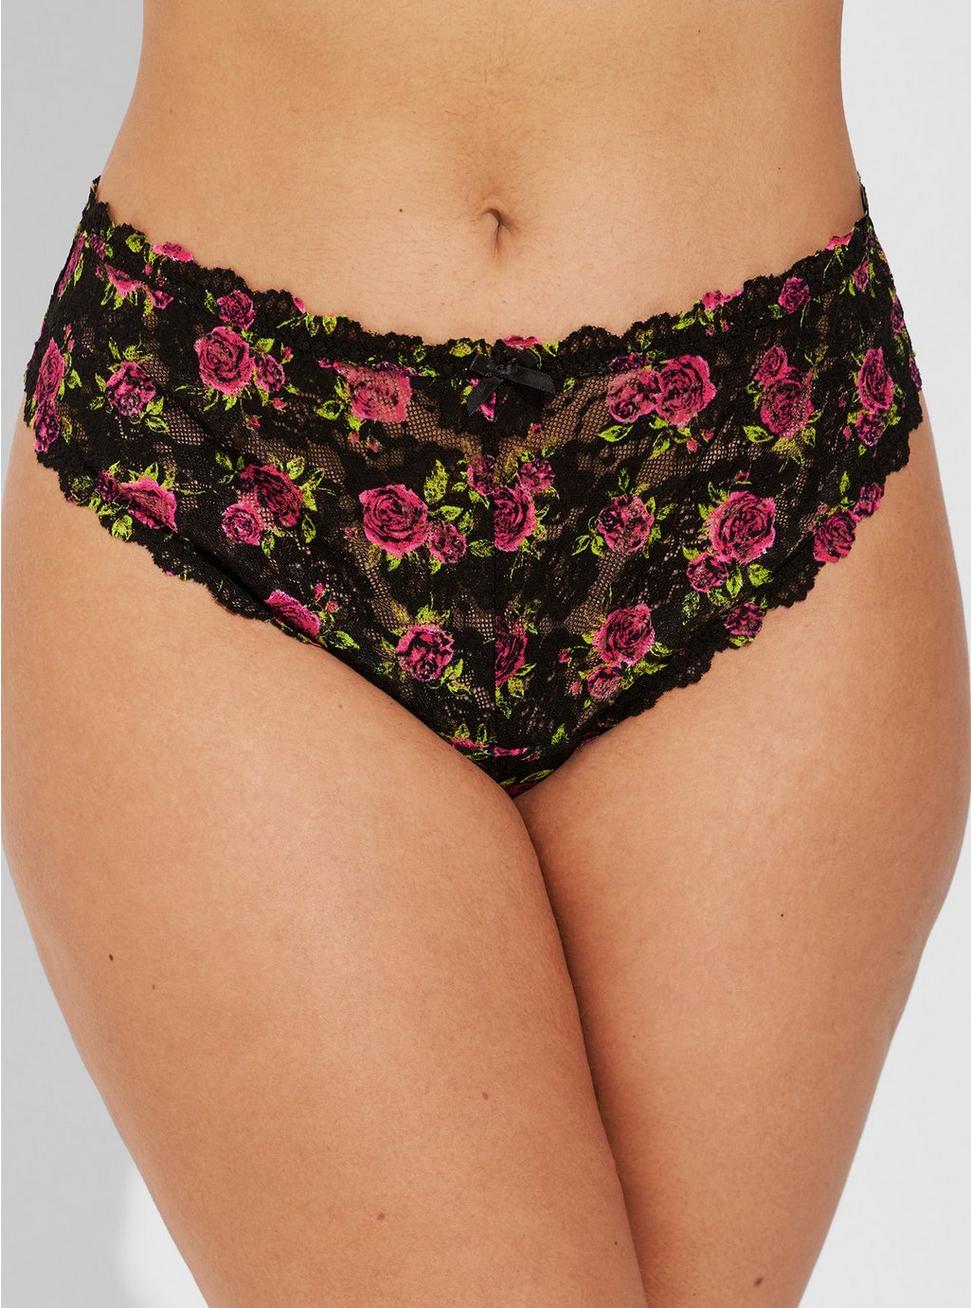 Simply Lace Mid Rise Thong Panty, BRUSHED ROSES FLORAL BLACK, alternate